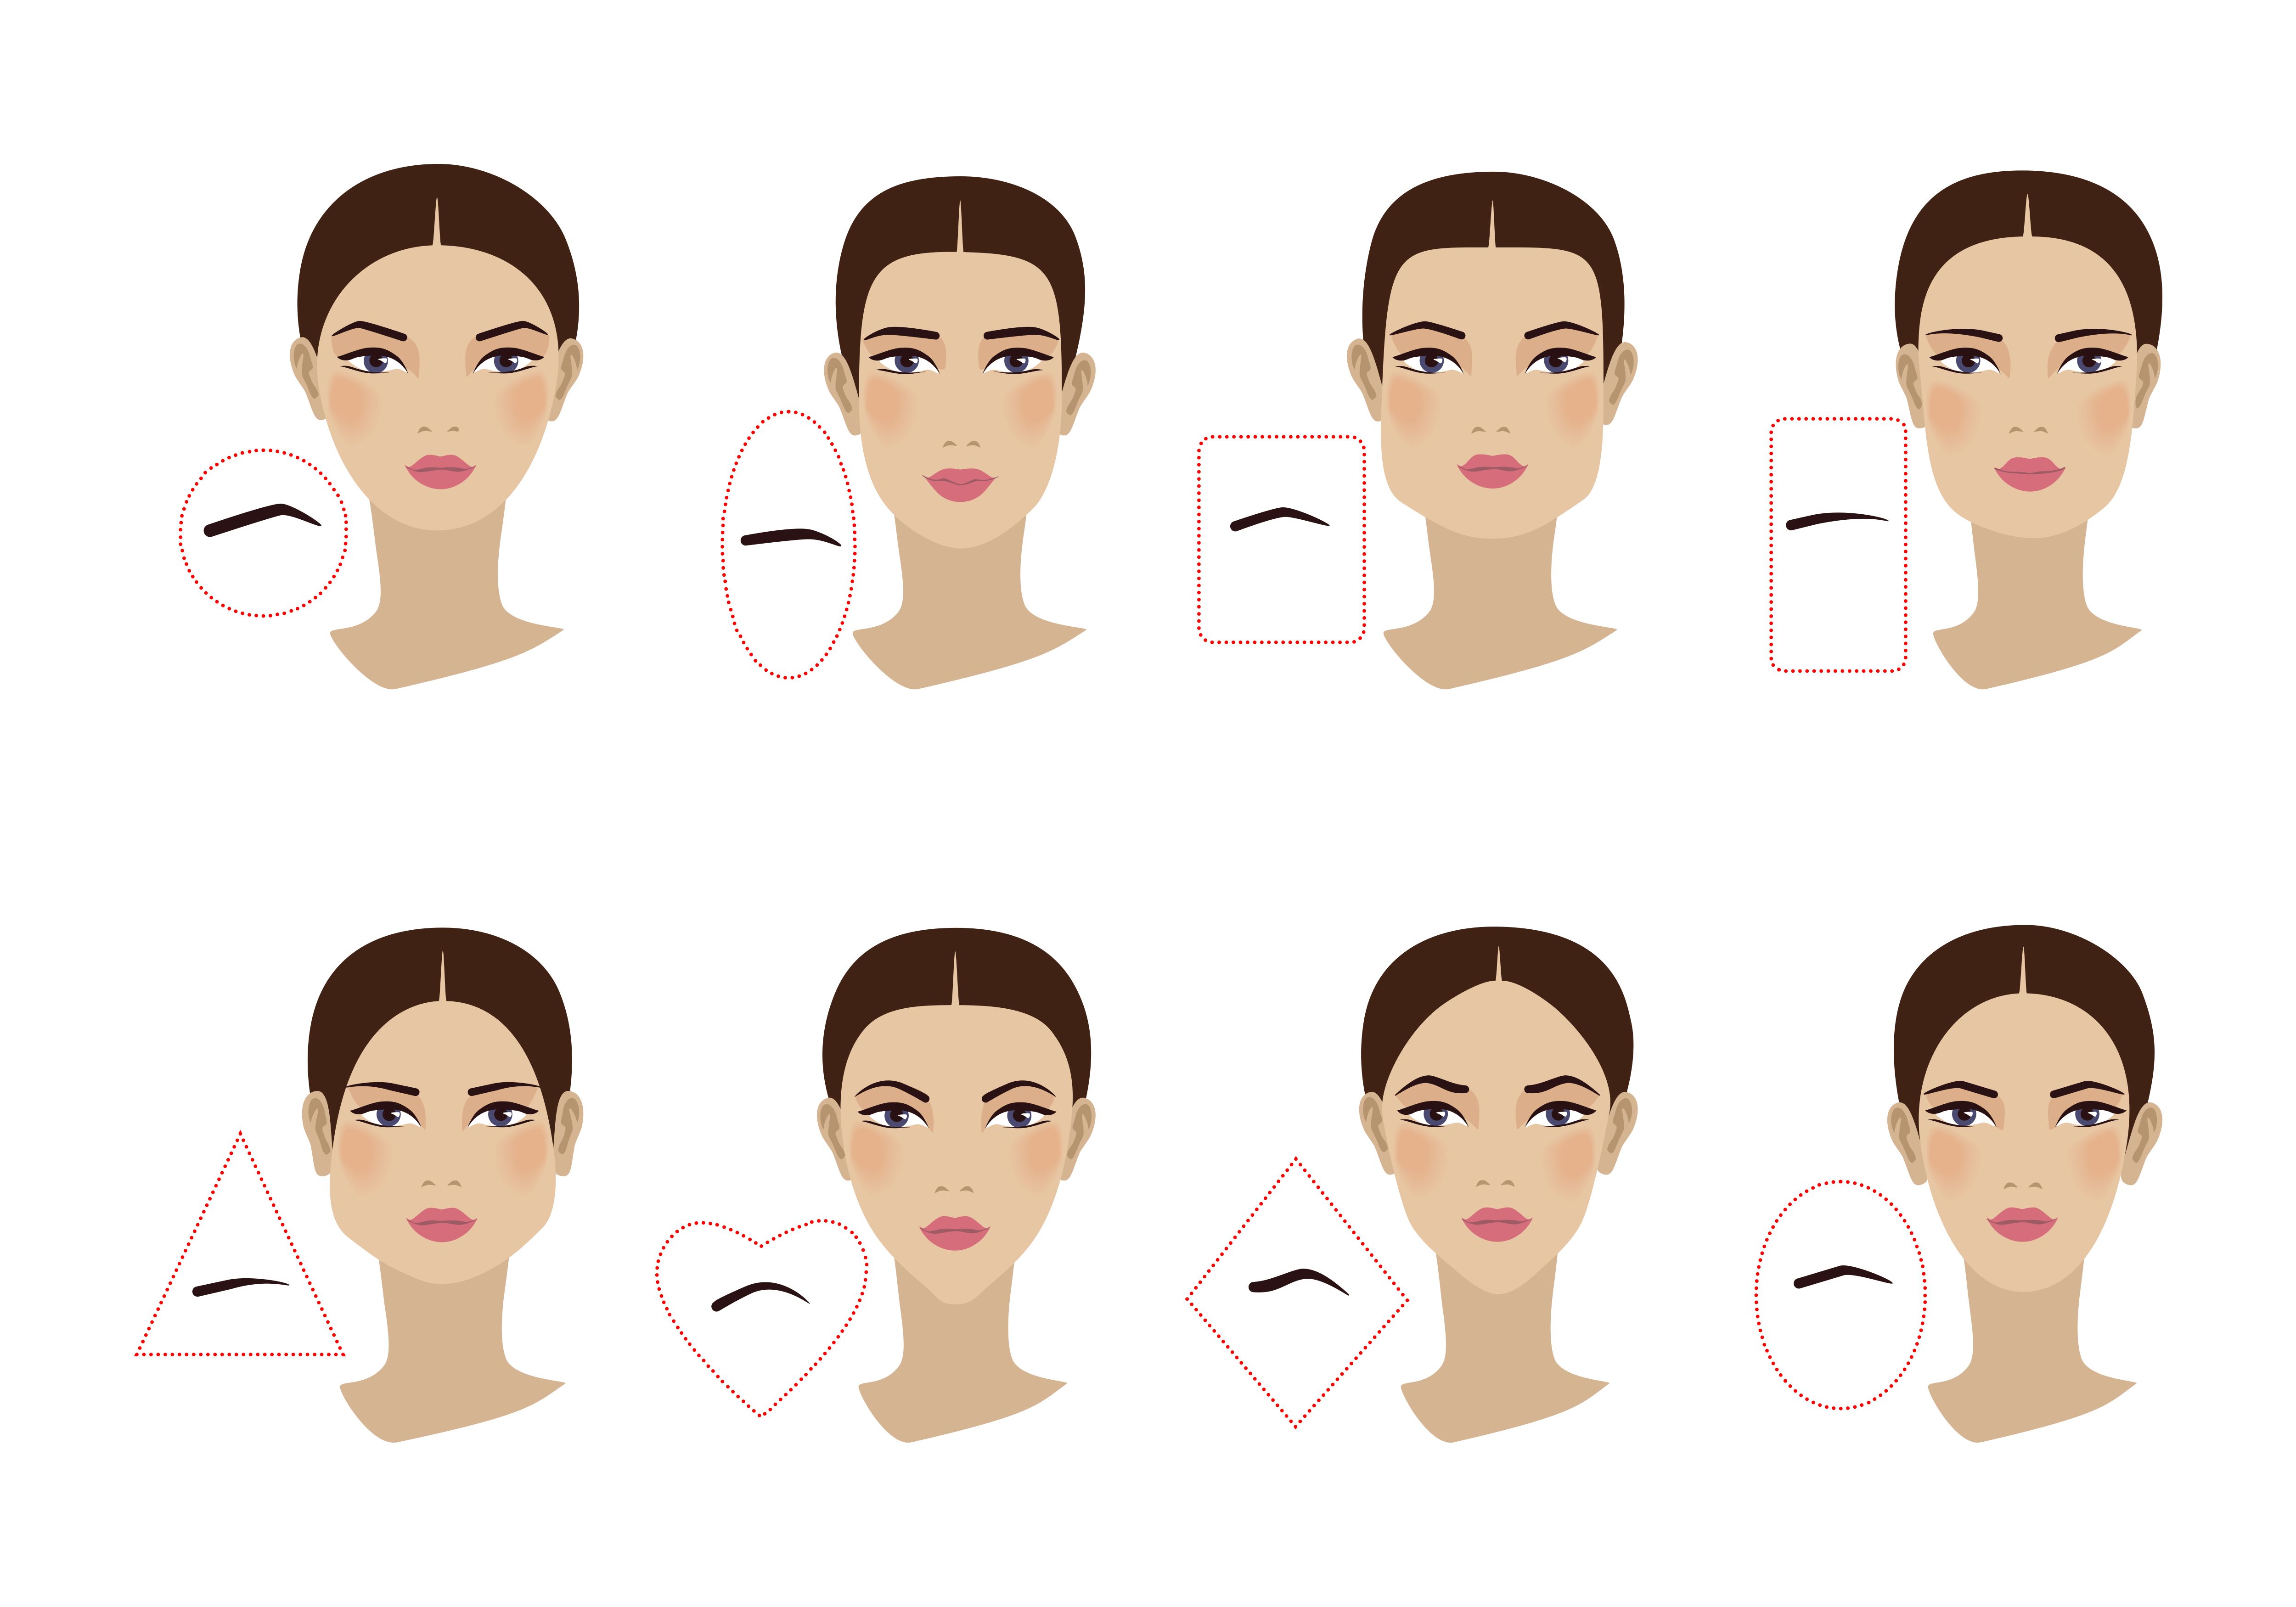 Female Eyebrow Shapes In Accordance With The Royalty Free Illustration 1585069545 